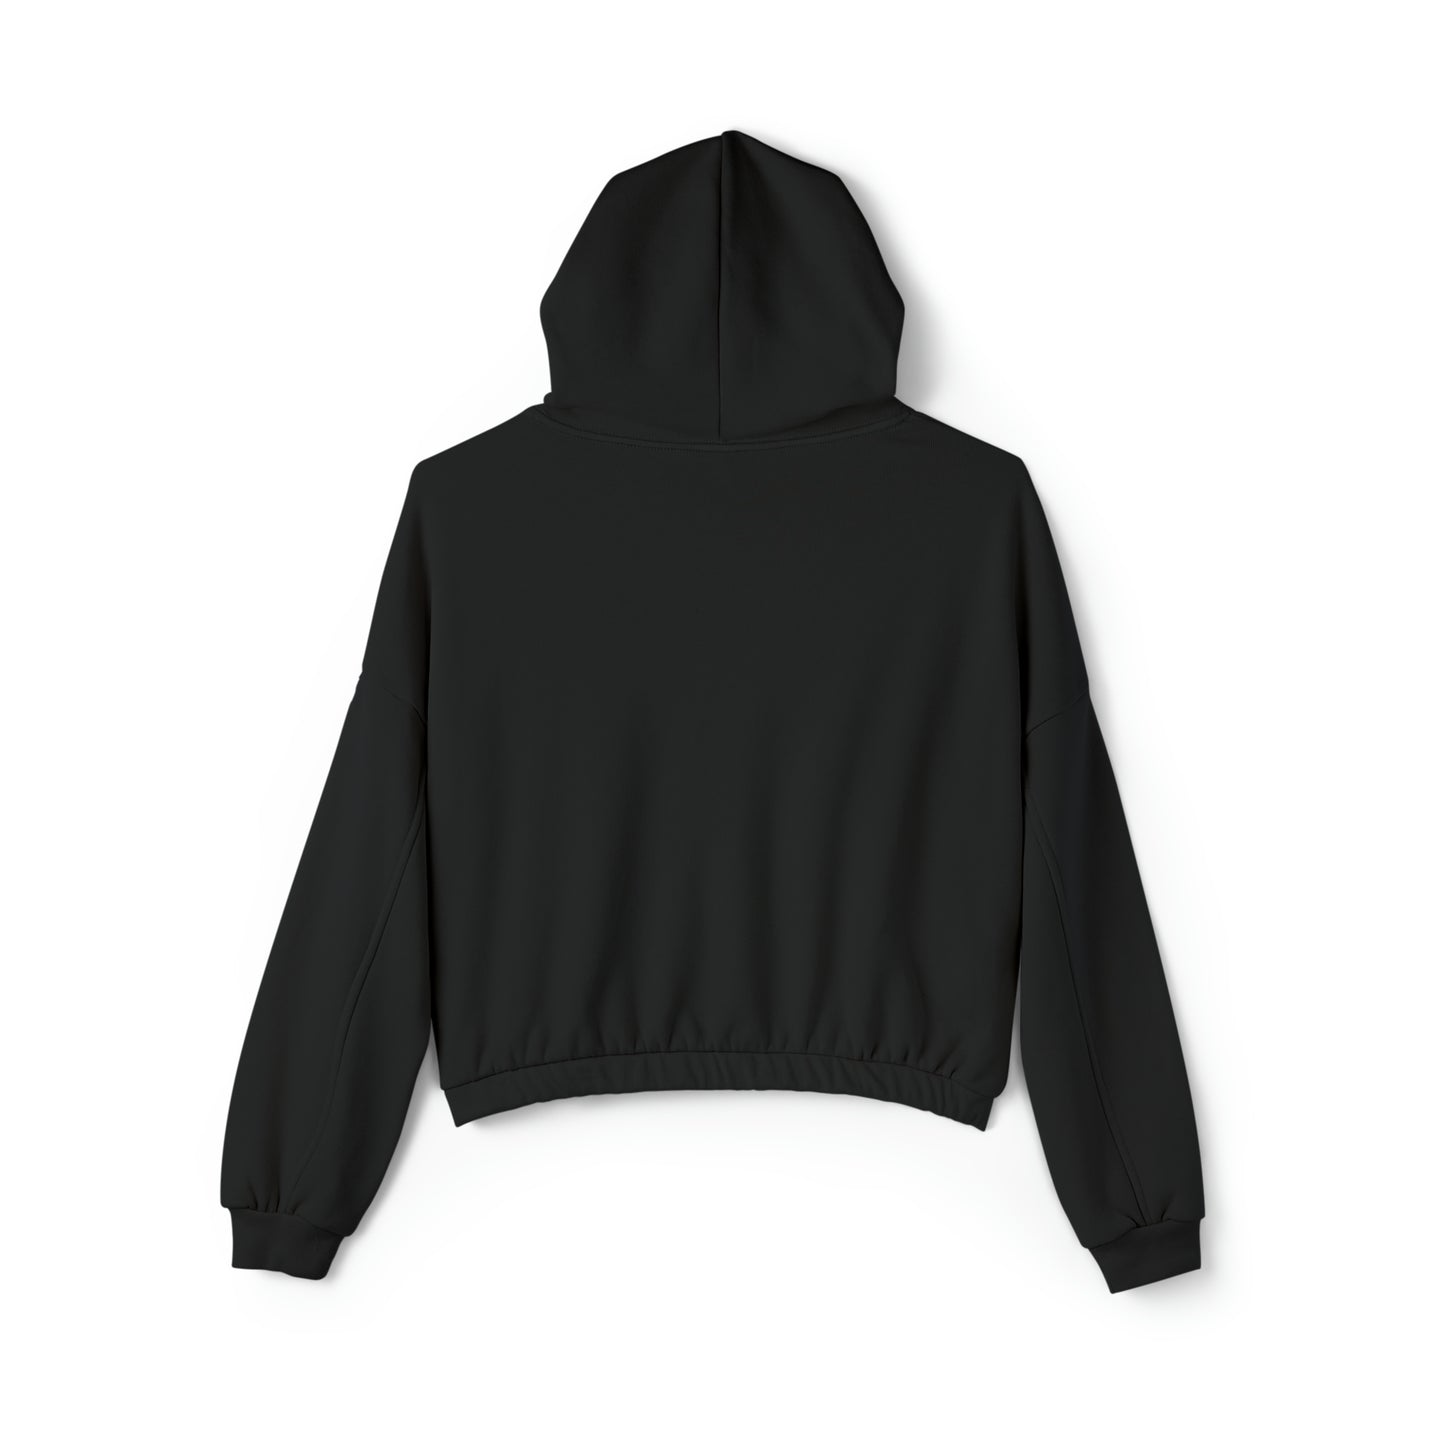 Taylor's Version Cinched Bottom Hoodie